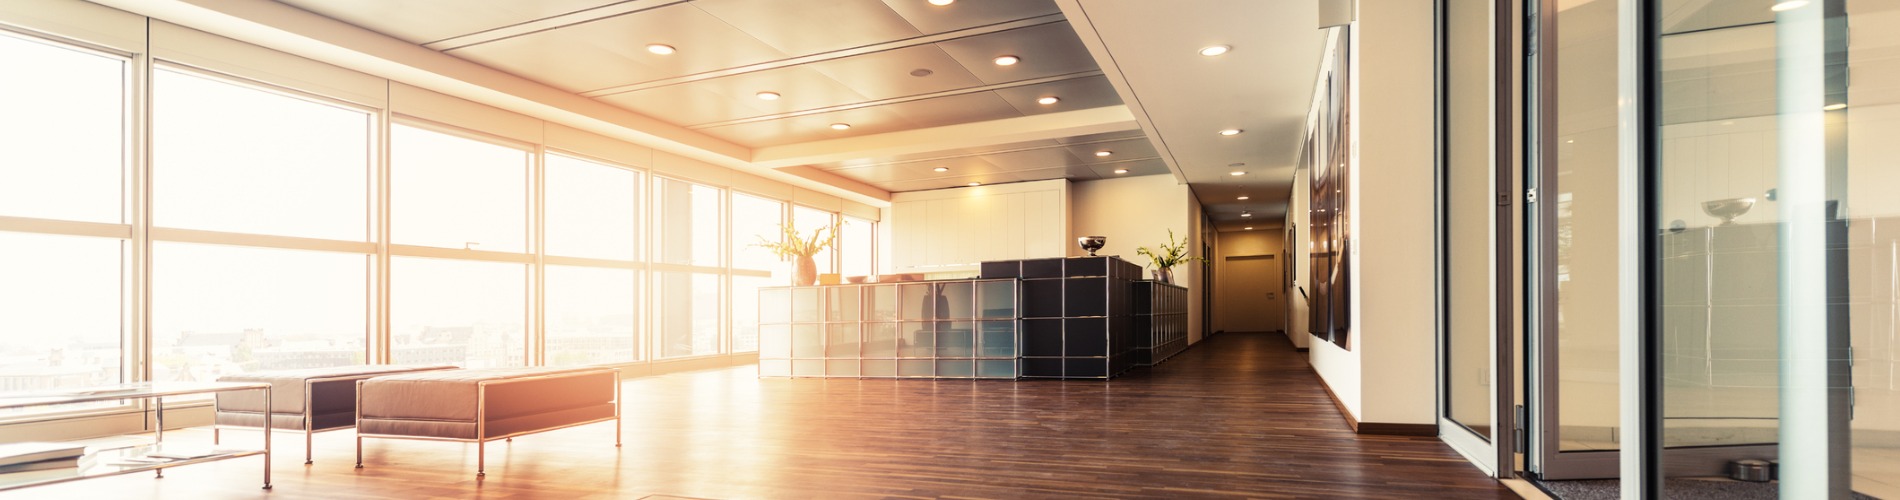 office-reception-with-wood-floors-and-window-wall- 1900 x 500